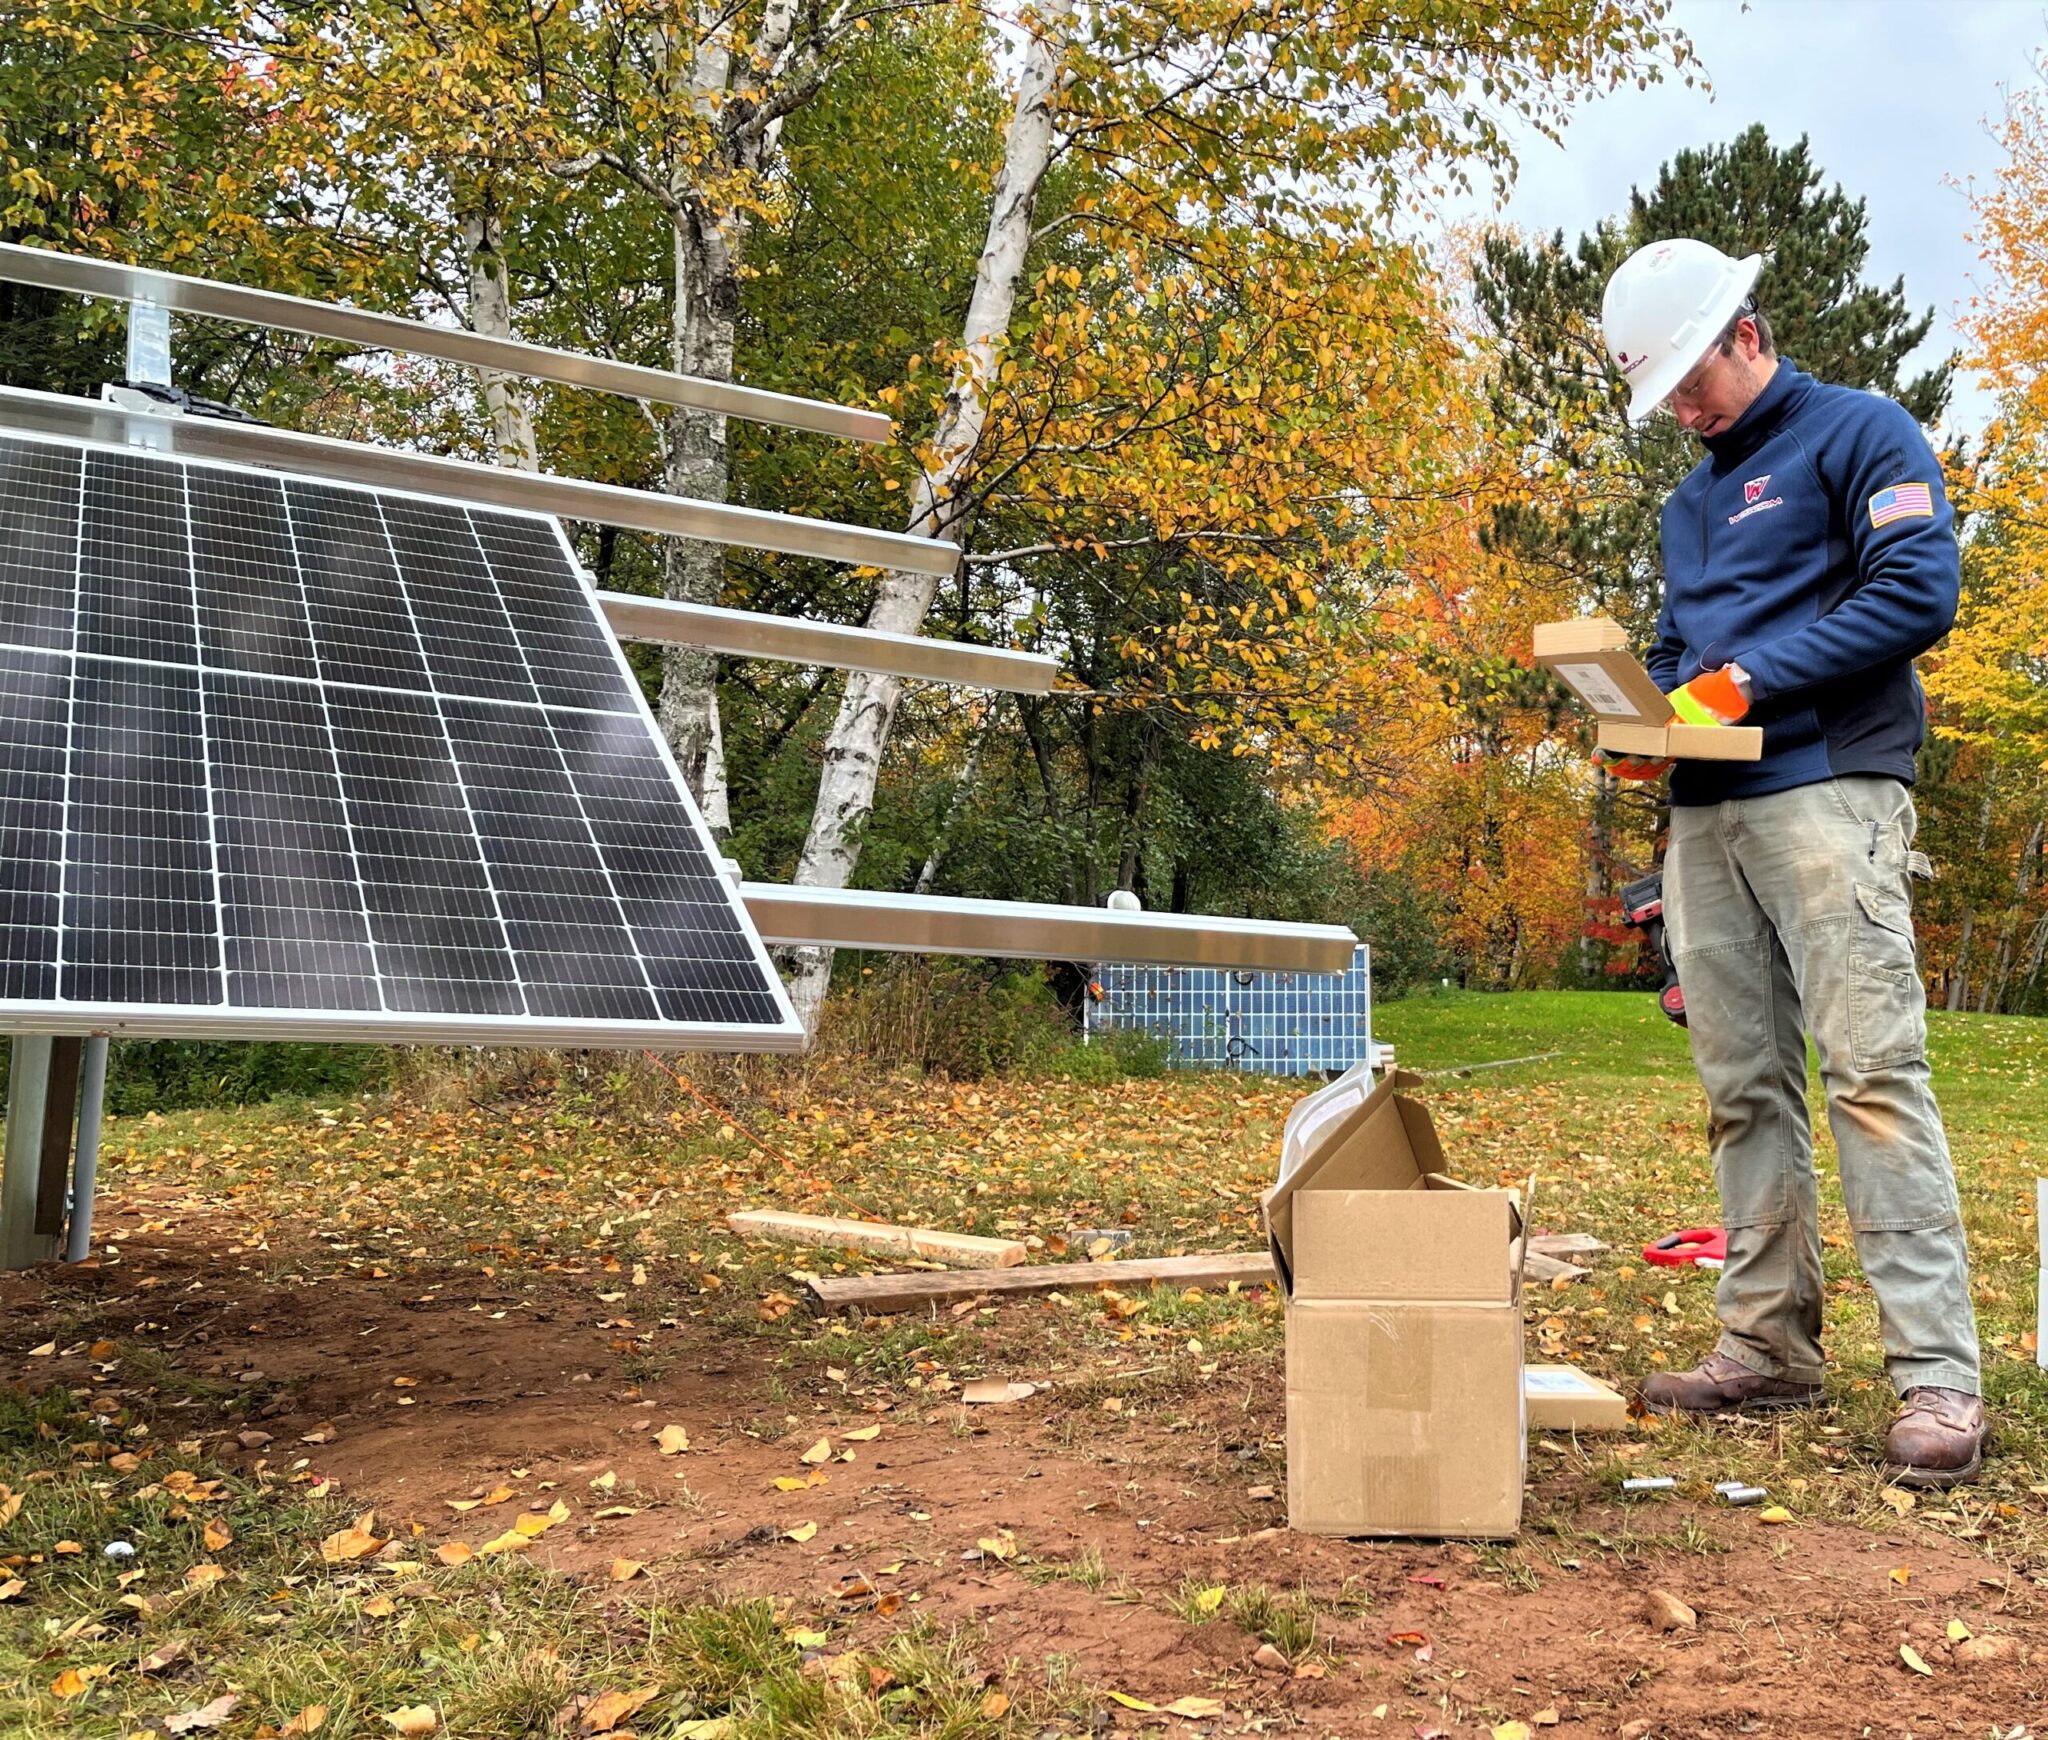 A Wescom employee looking down and grabbing a tool to work on a nicely sized solar array